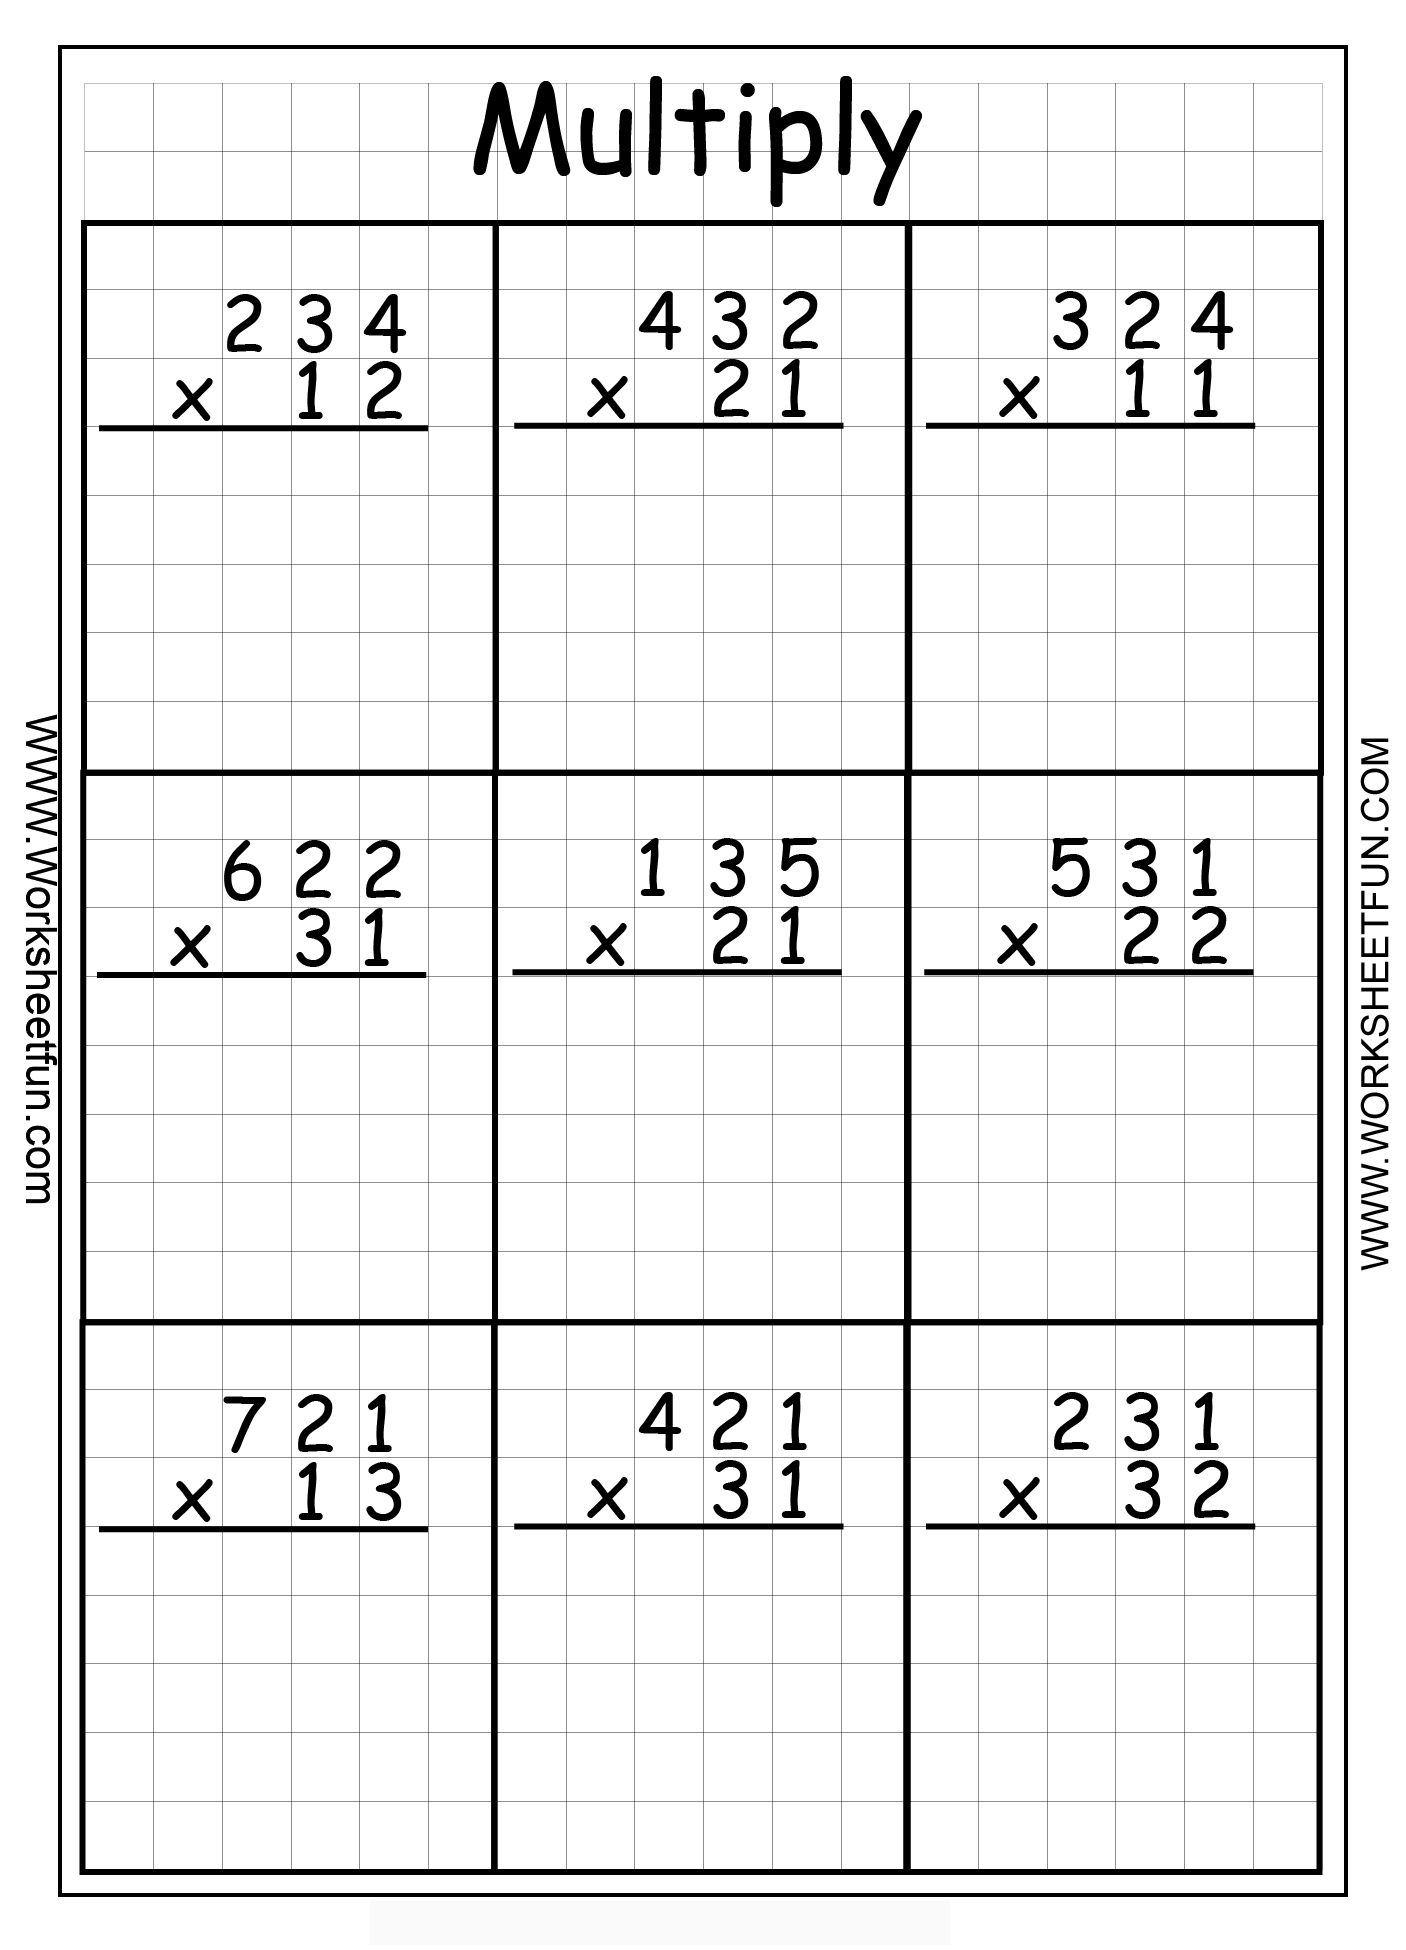 multiplication-worksheets-and-printouts